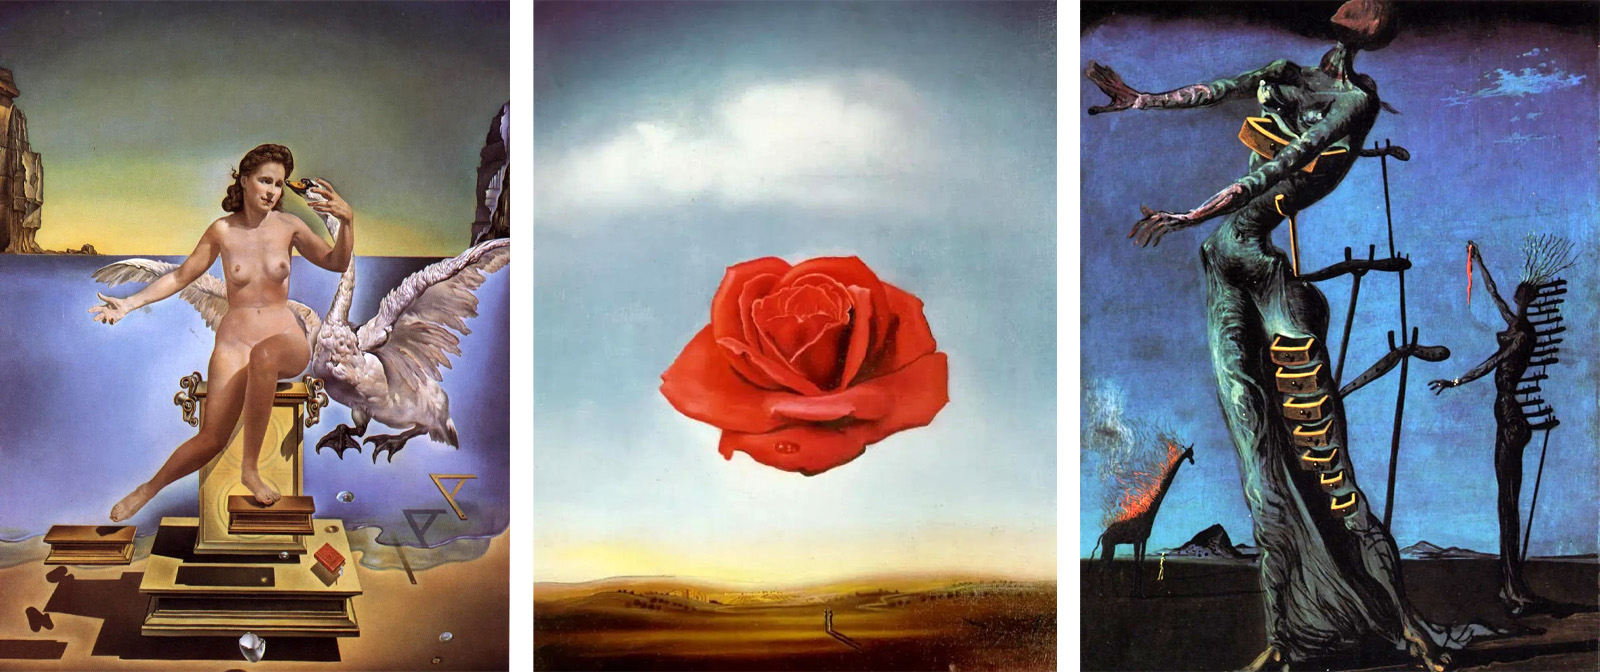 What is the hidden meaning of Dalí's famous painting 